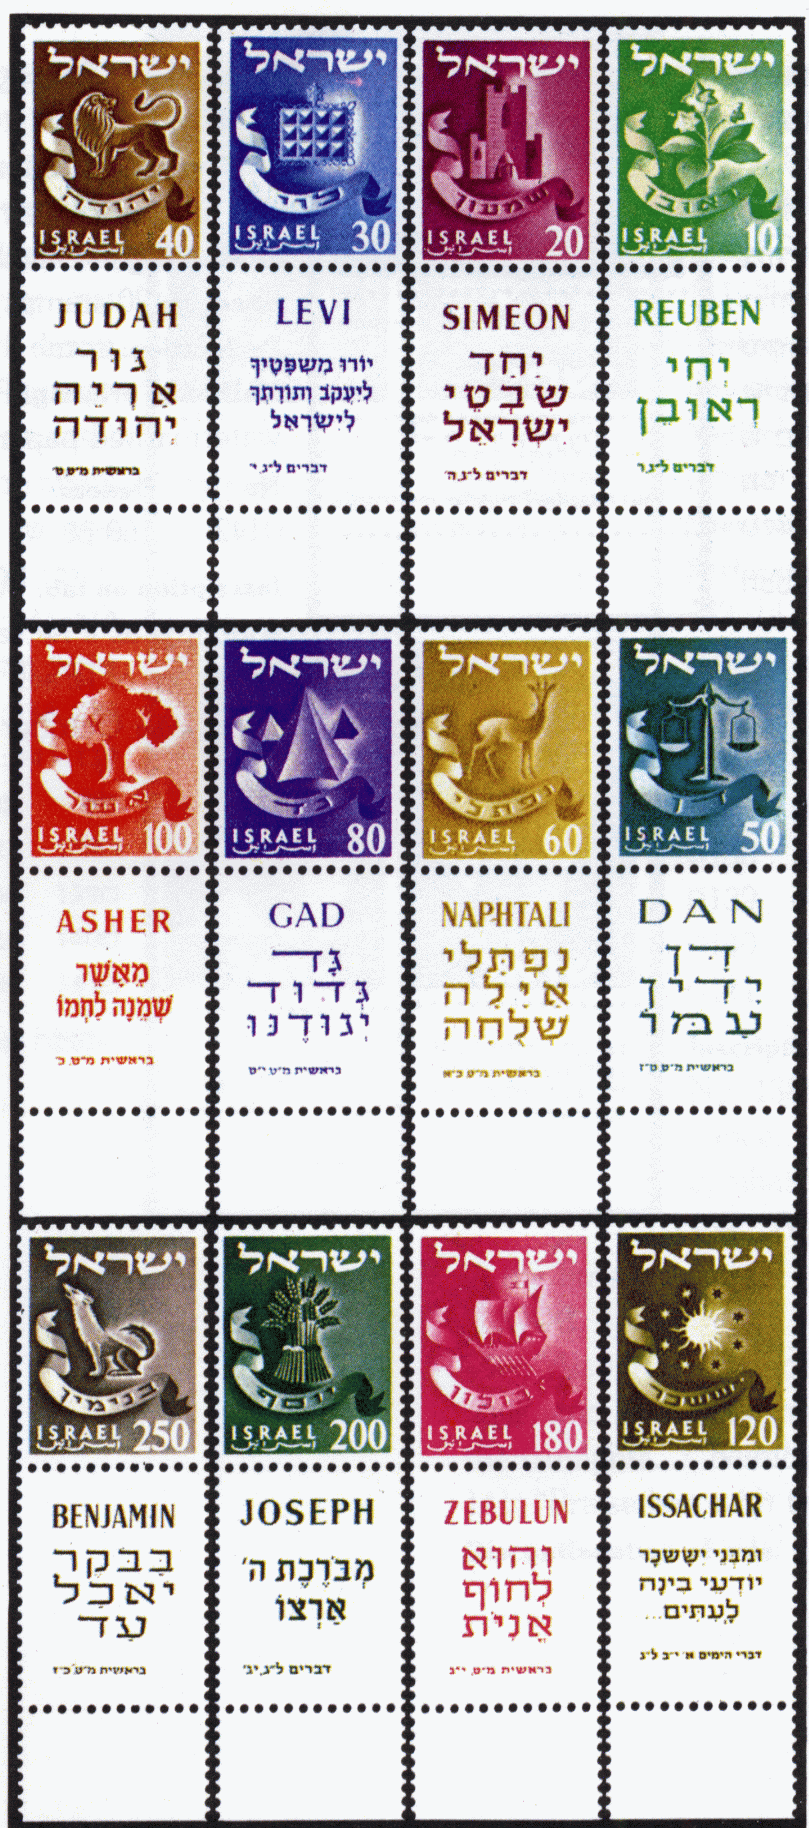 Israeli Stamps showing symbols of the 12 Tribes